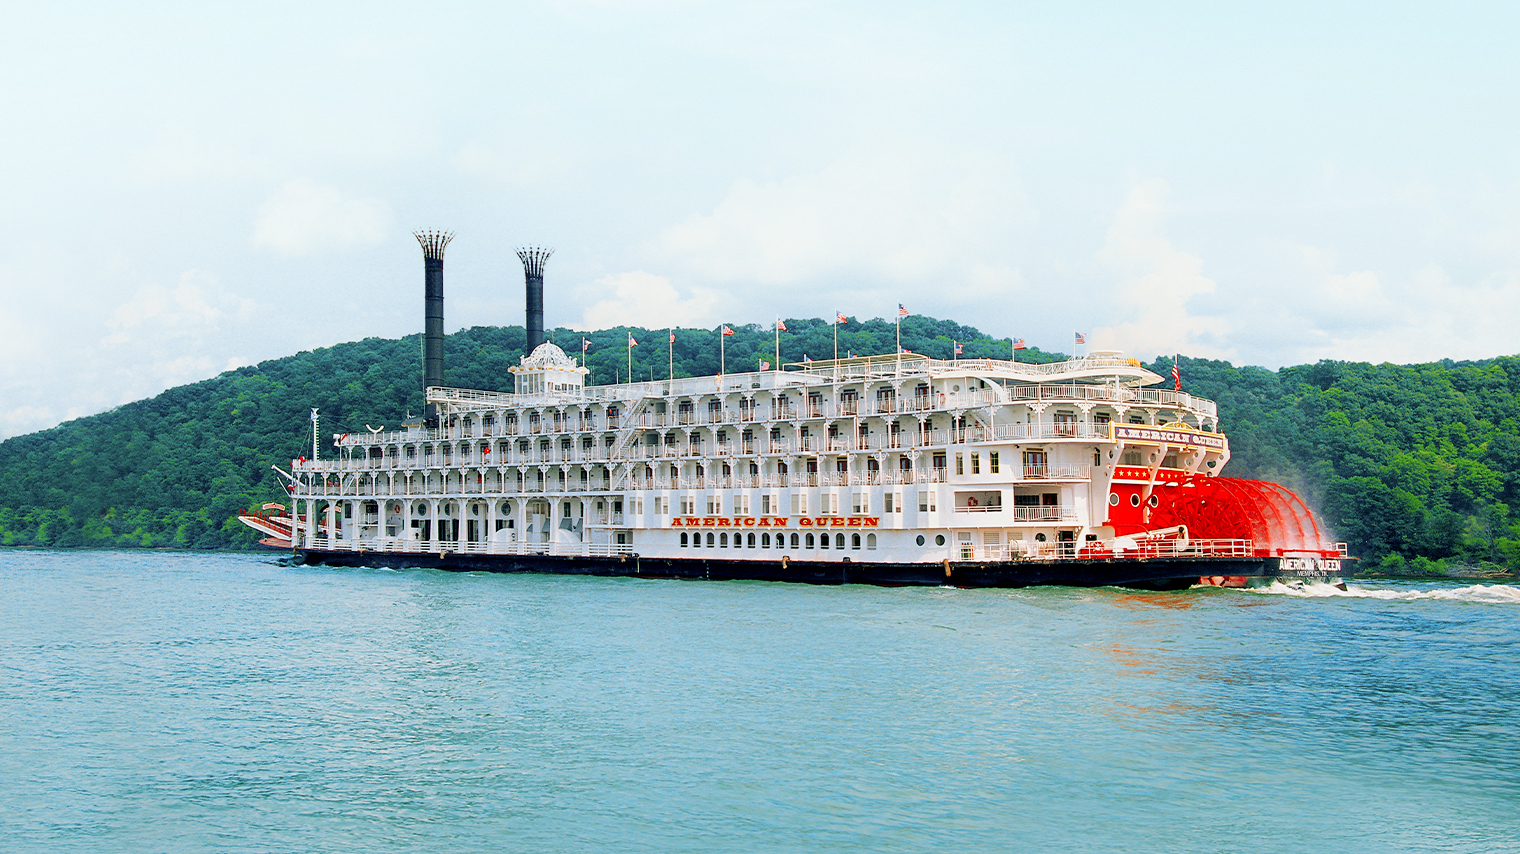 American Queen Voyages (River Cruises) Free RT Airfare Plus Up To 20% Off Select Sailings - Book By December 2, 2022 $2399